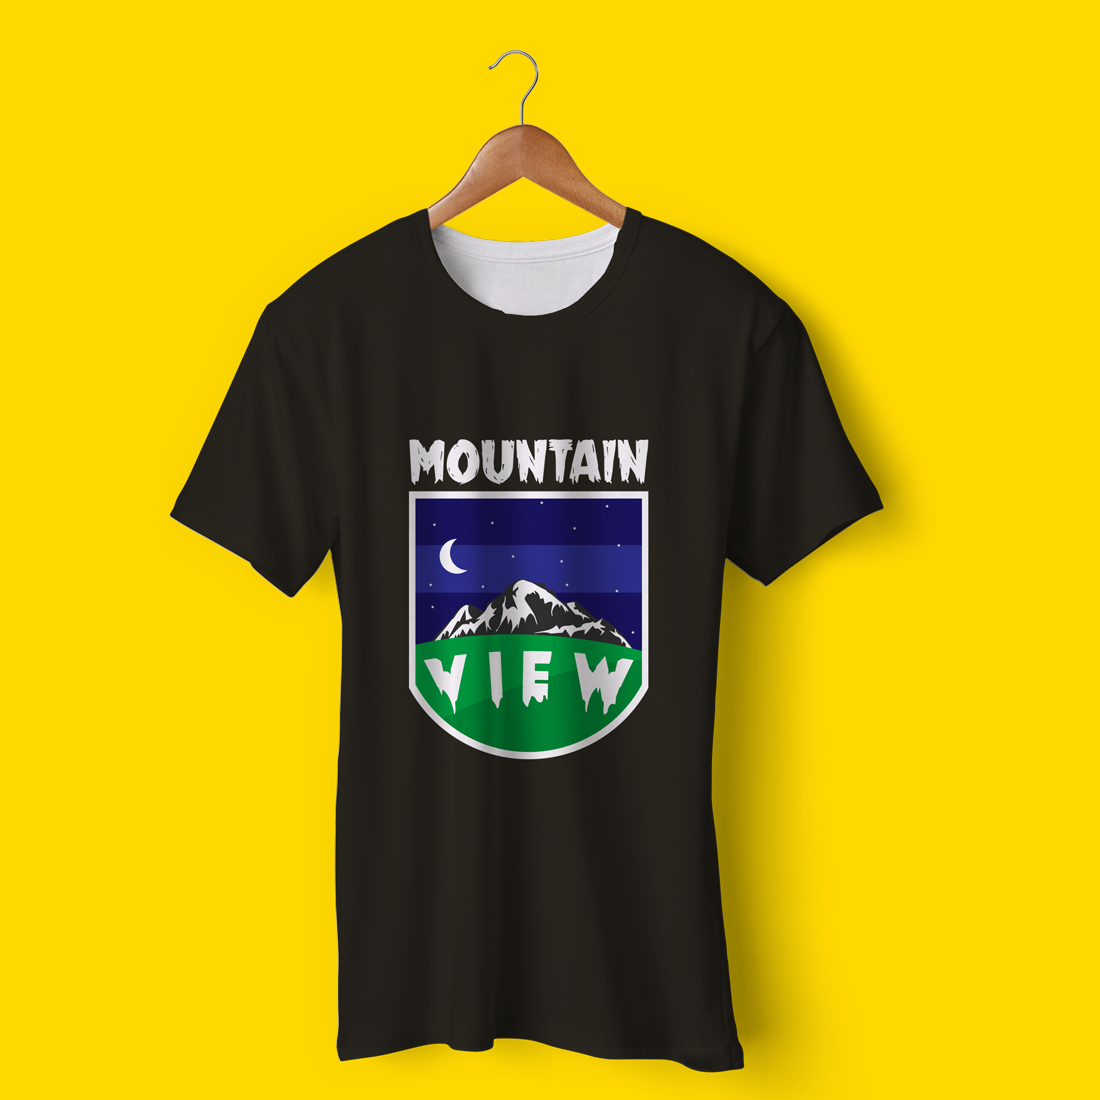 Black t - shirt with the mountain view logo on it.